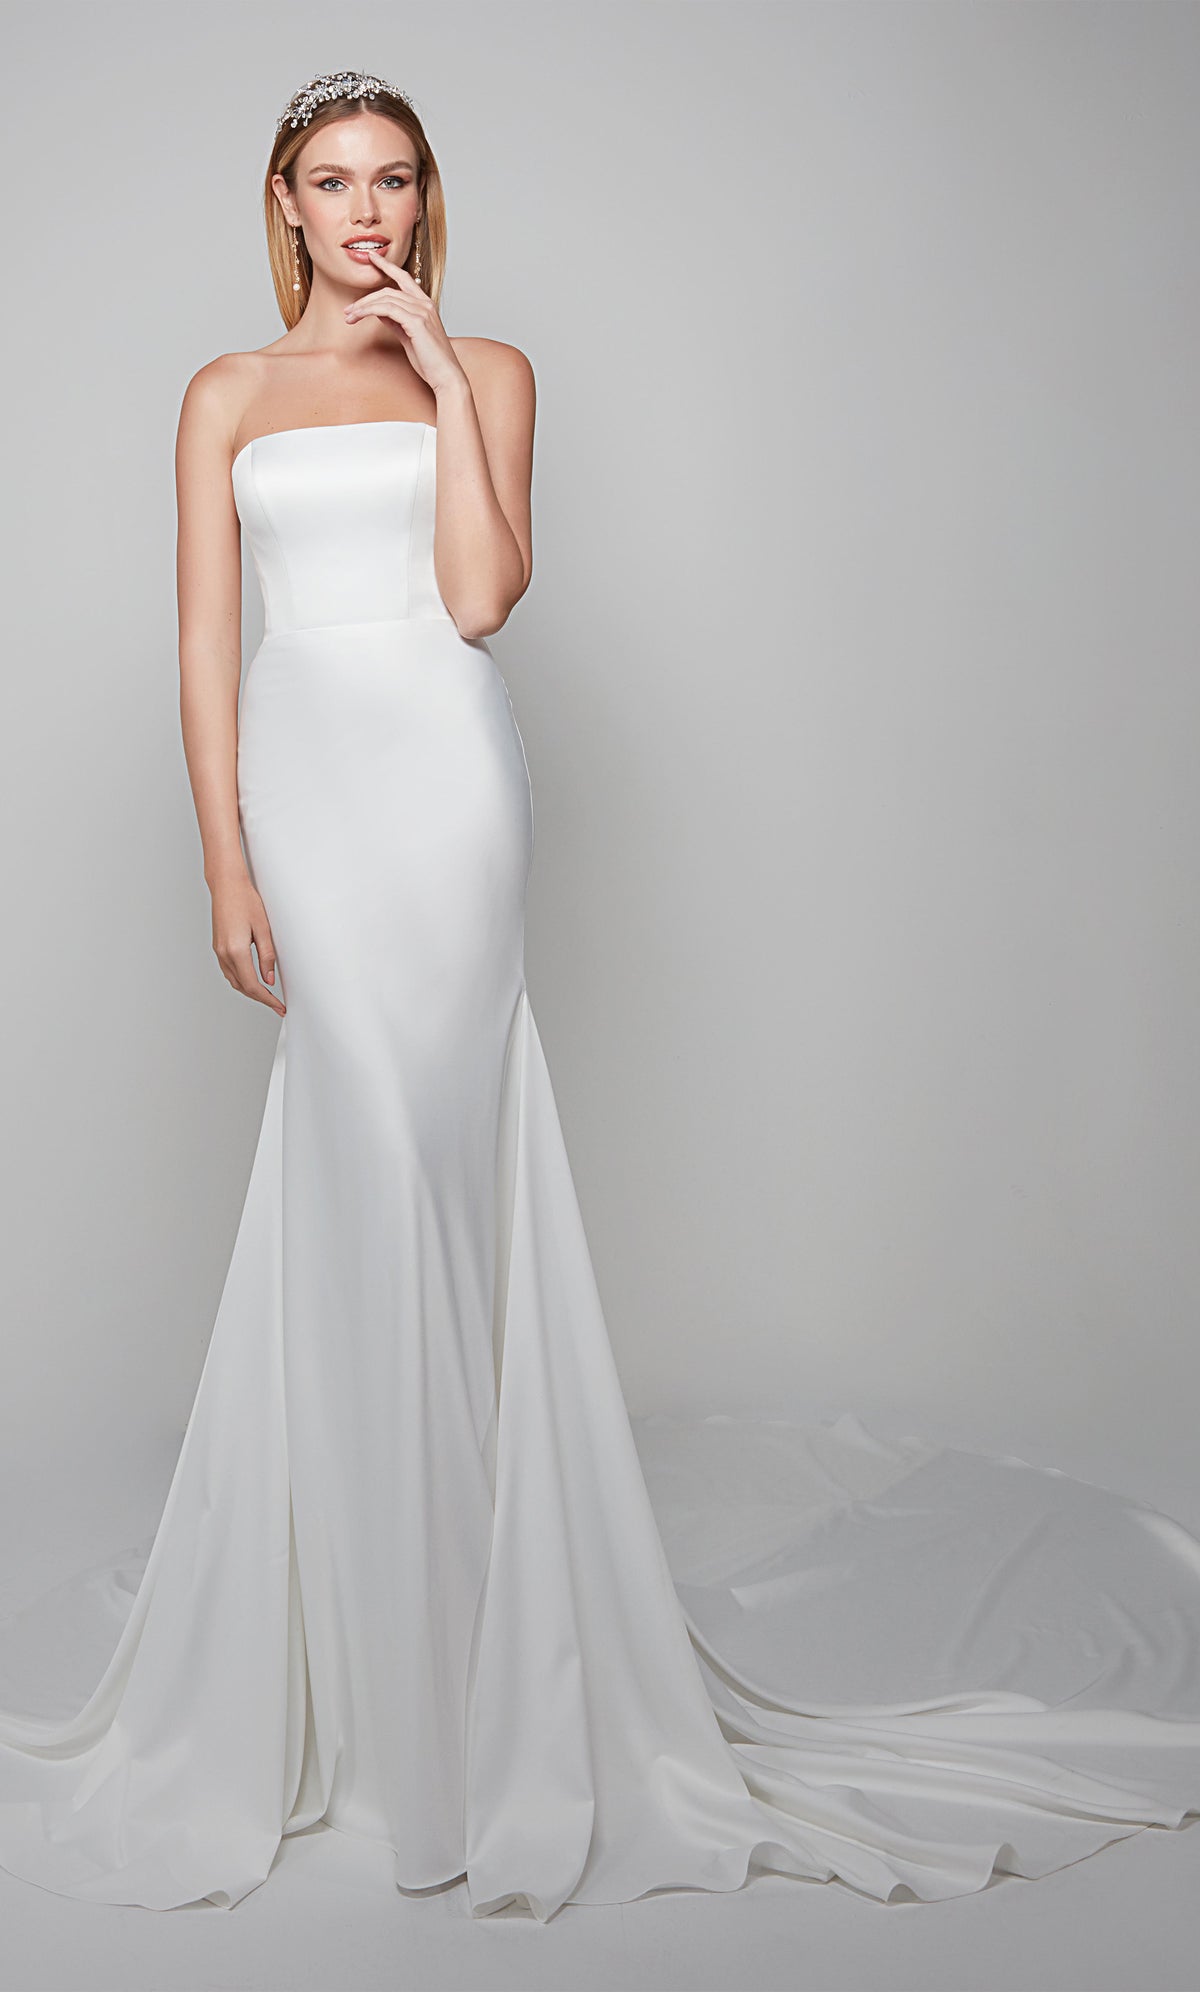 Strapless satin wedding dress cut in a fit and flare silhouette in diamond white color. Color-SWATCH_7060__DIAMOND-WHITE